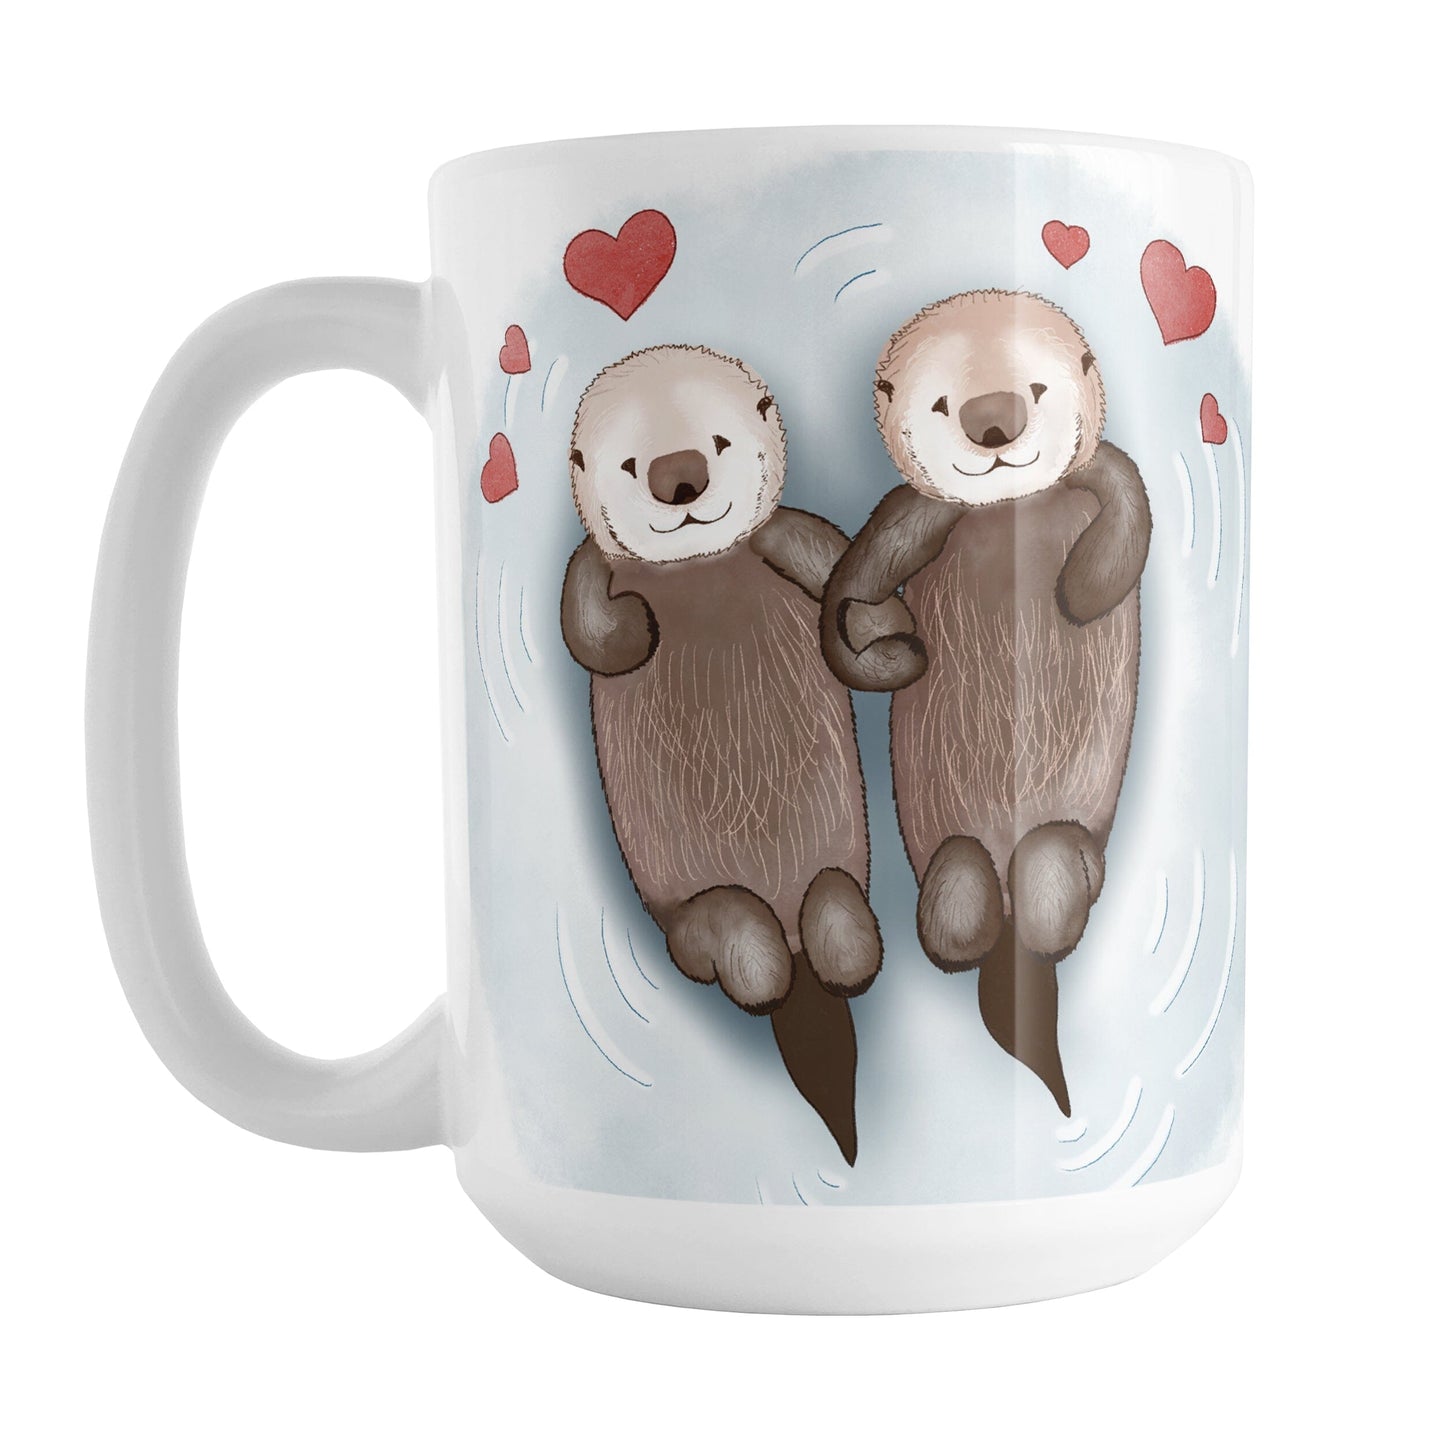 Floating Otters in Love Mug (15oz) at Amy's Coffee Mugs. A ceramic coffee mug designed with a hand-drawn illustration of two cute otters floating in the water, holding hands in love, with red hearts above them. This adorable drawing is on both sides of the mug.